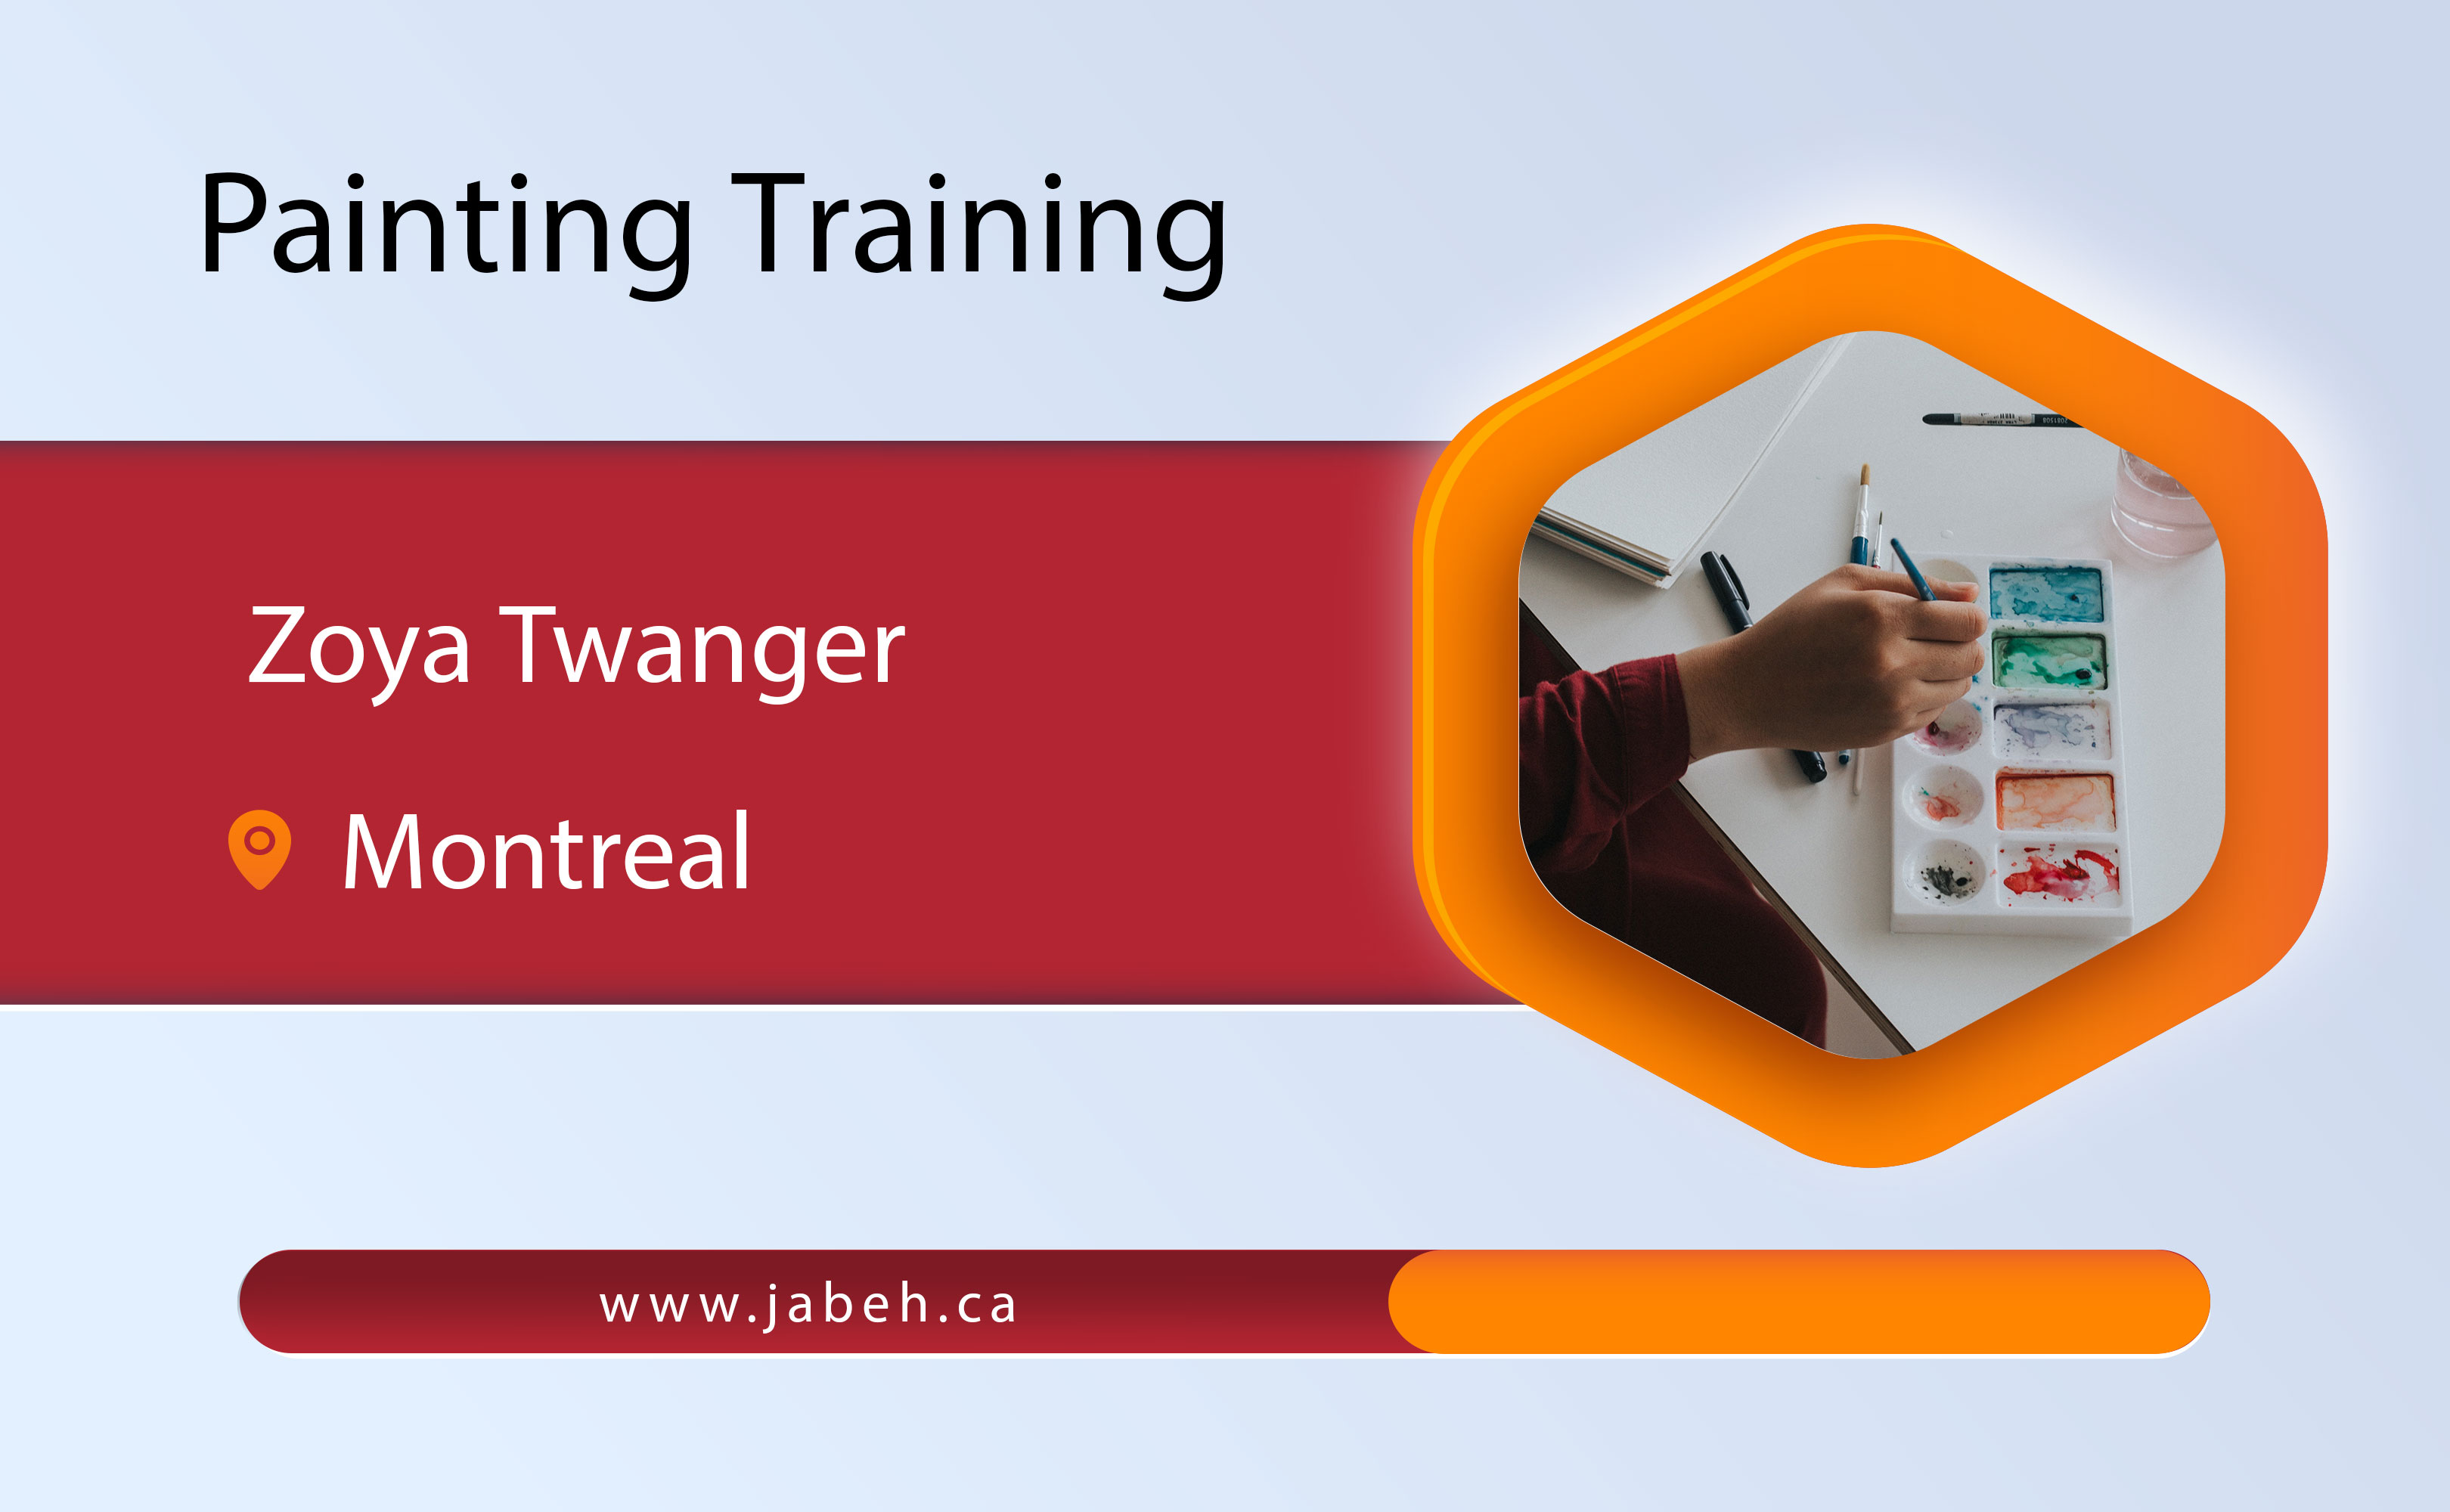 Zoya Tawanger's specialized design and painting training in Montreal